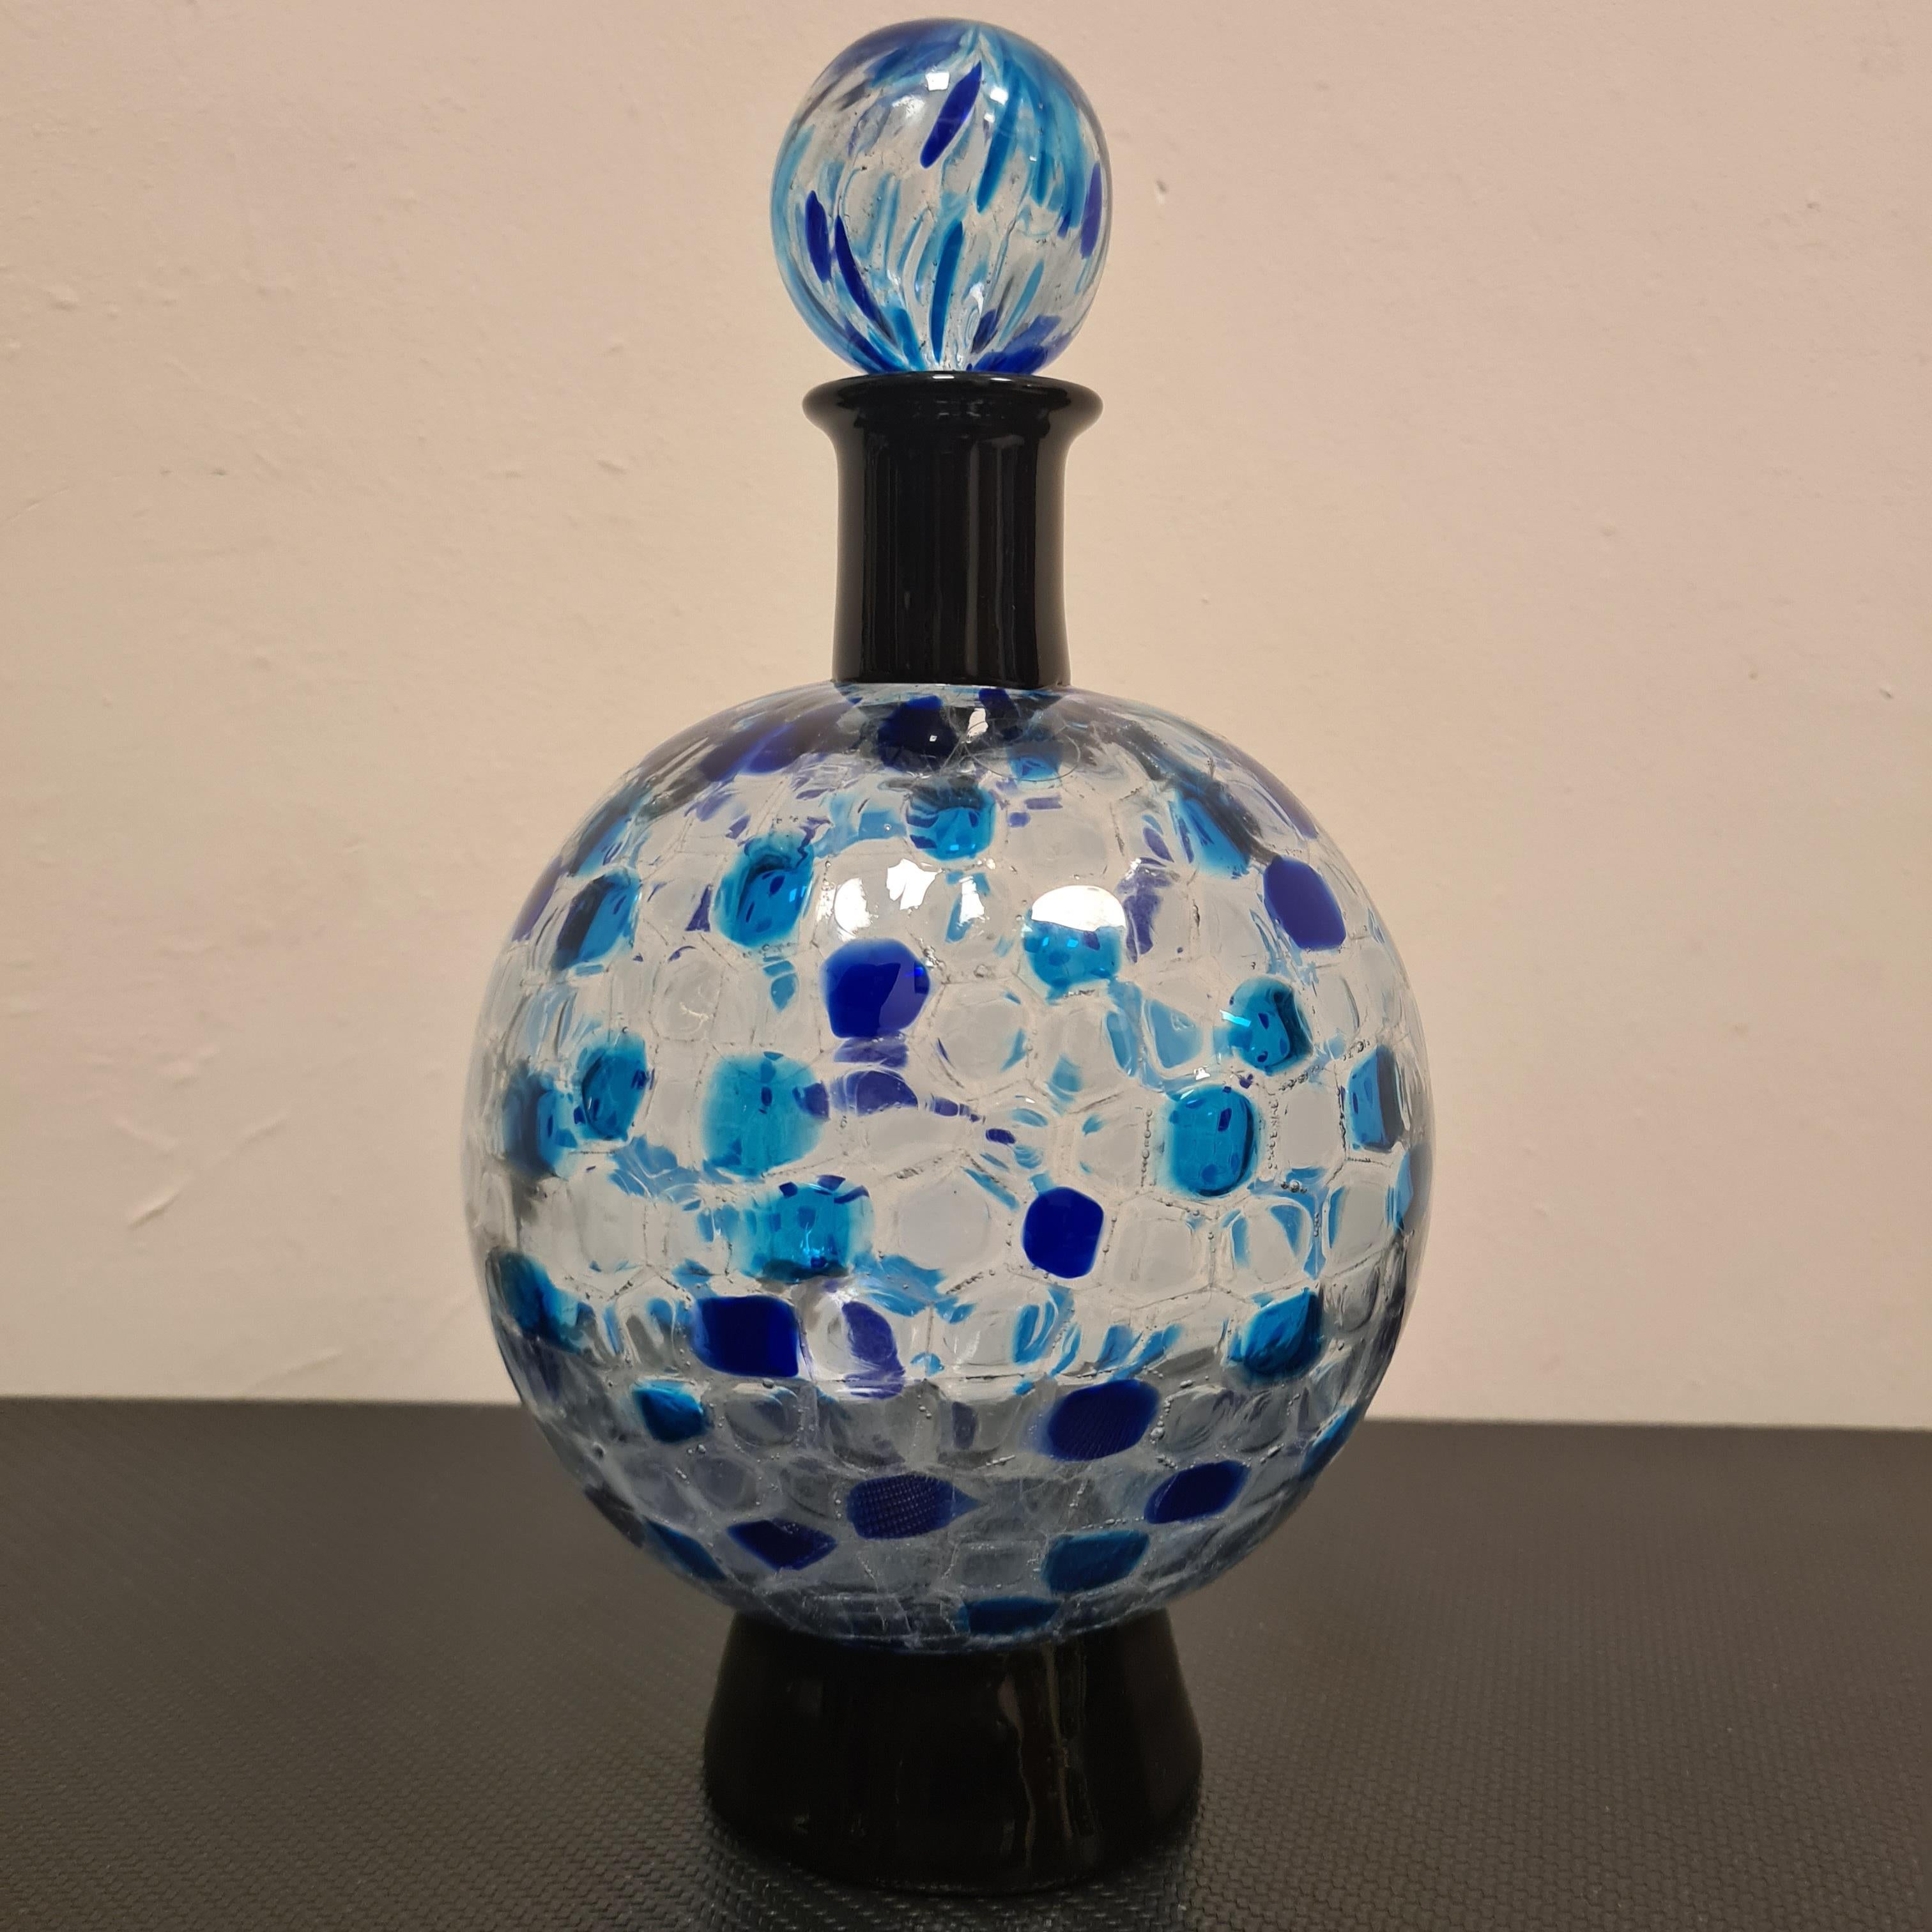 Chambord bottle designed by Alessandro Mendini for Venini.

Rare spherical-shaped blown glass bottle with verdemare murrine and sapphire decoration with black glass neck and truncated base.

Refined and elegant this collectible bottle is a unique